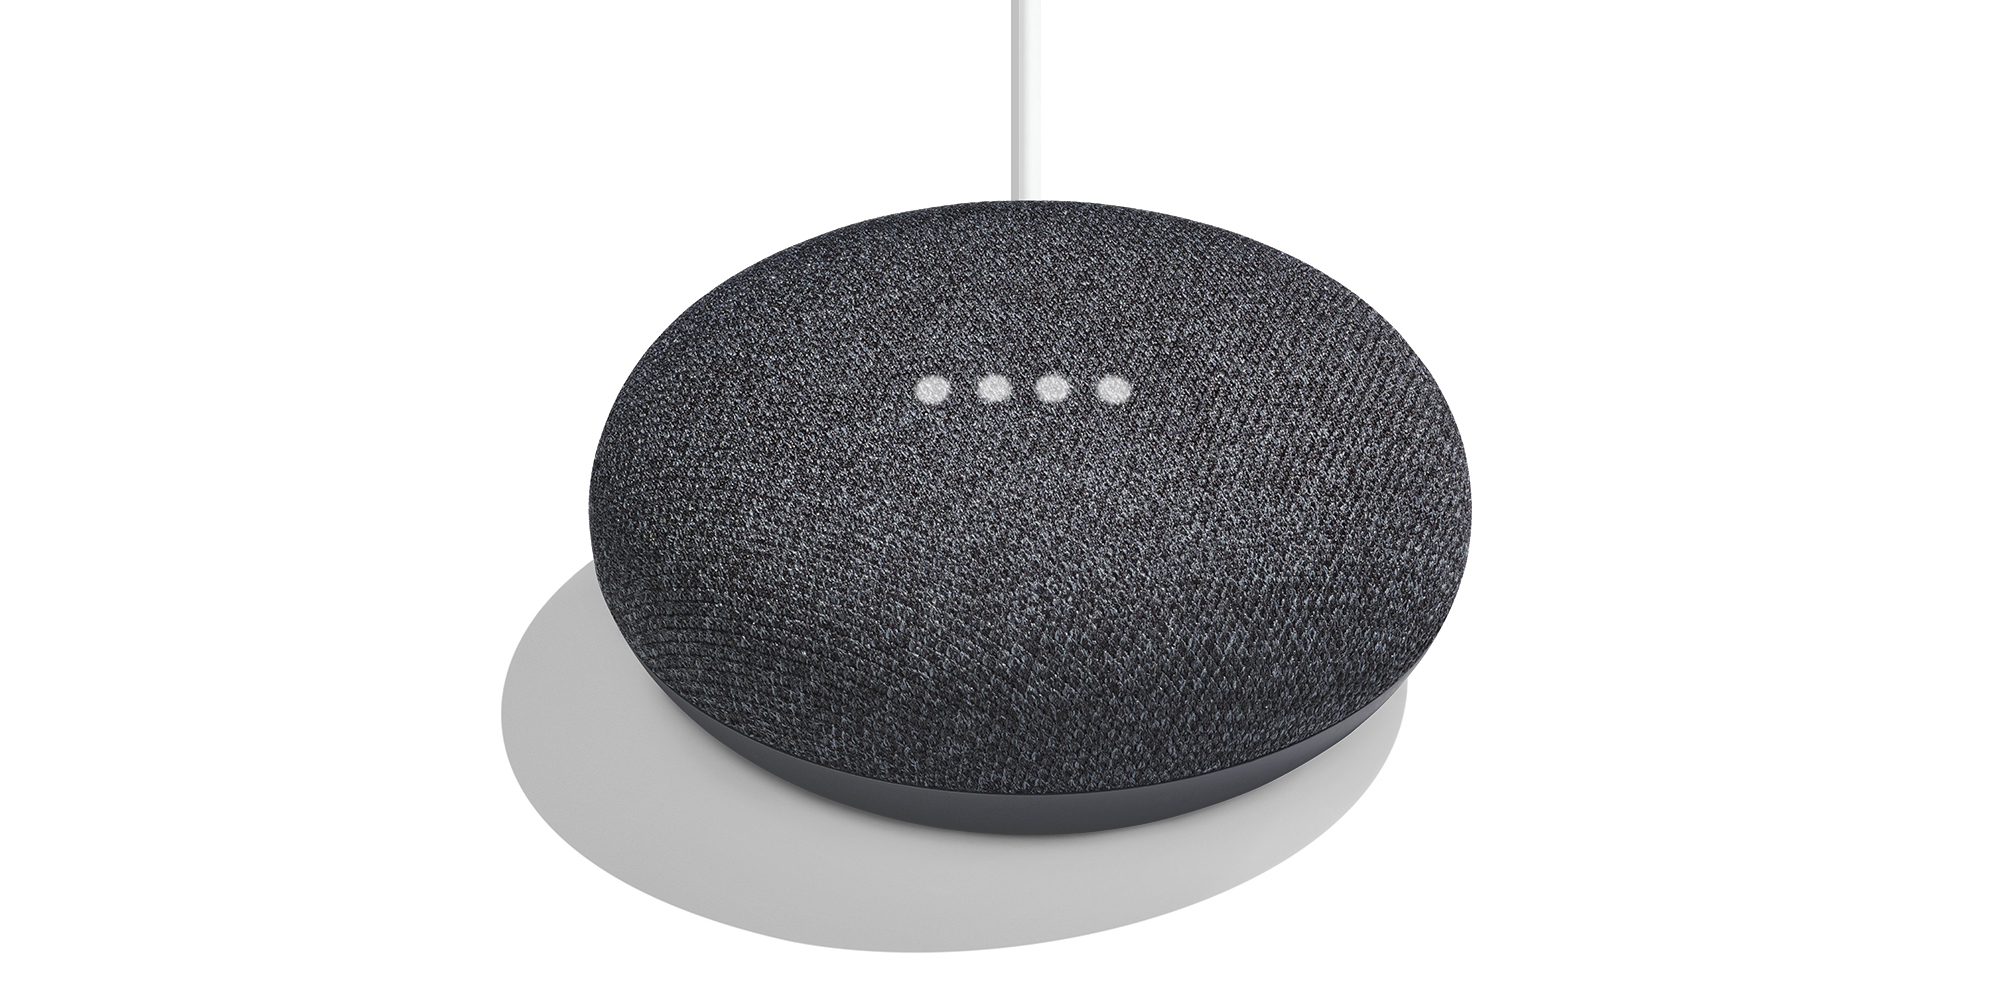 Google Home Mini Fully Featured Assistant Smart Speaker W Compact Design For Only 49 9to5google